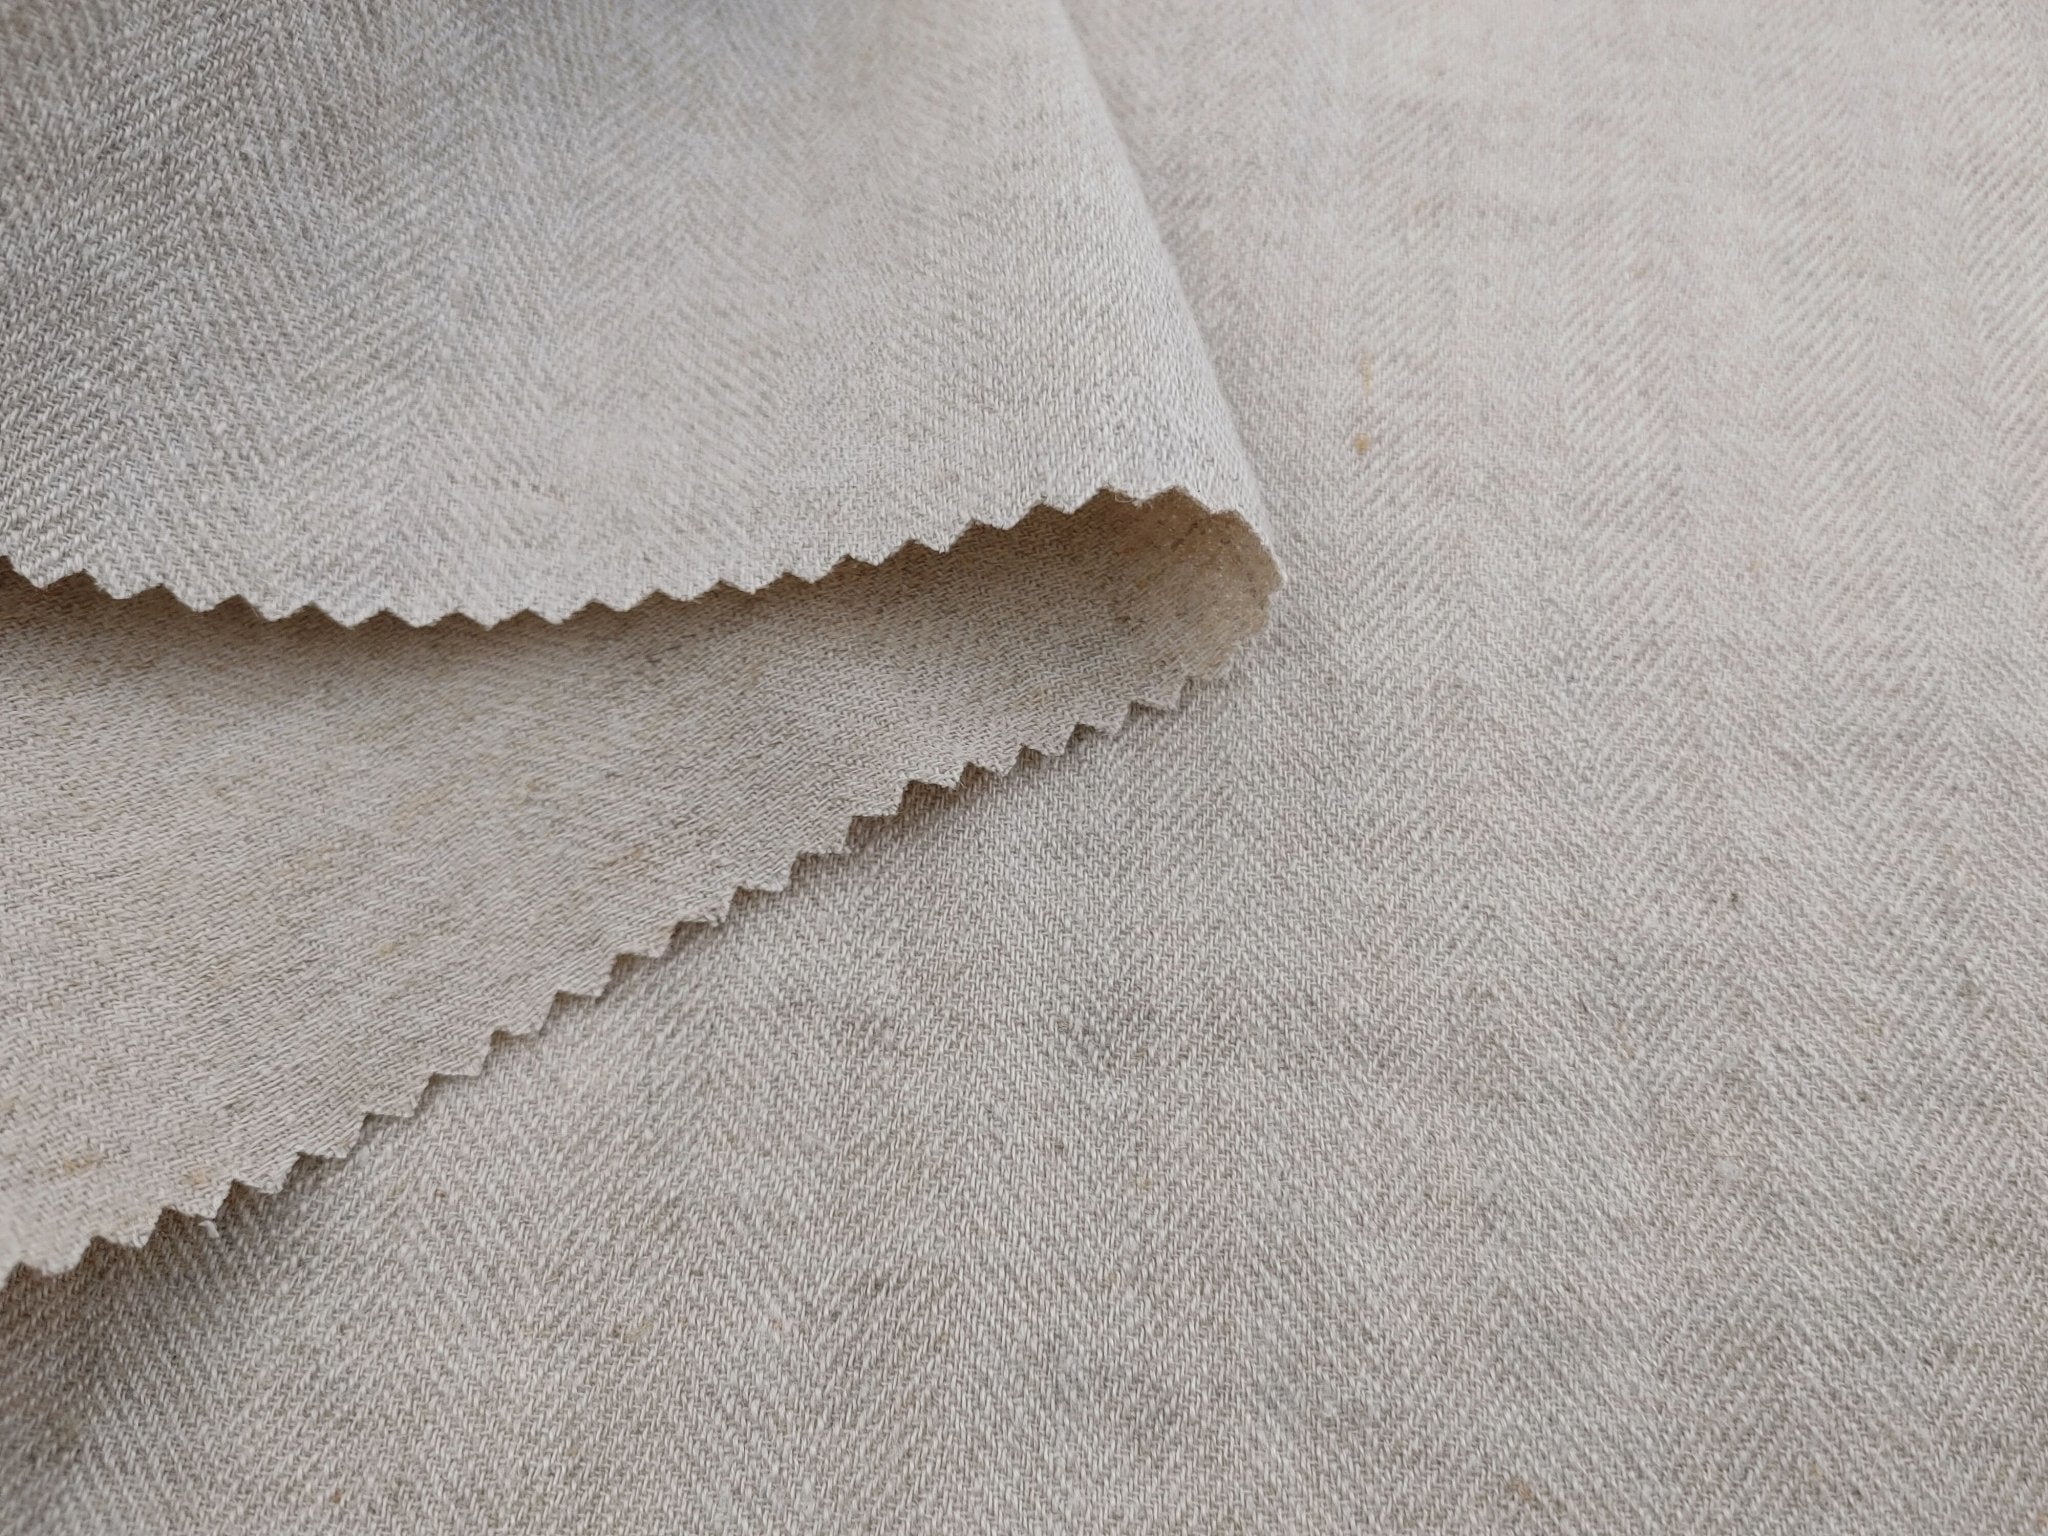 Harmony Hues: Natural Linen Polyester HBT Herringbone Twill Fabric 7730 - The Linen Lab - Natural